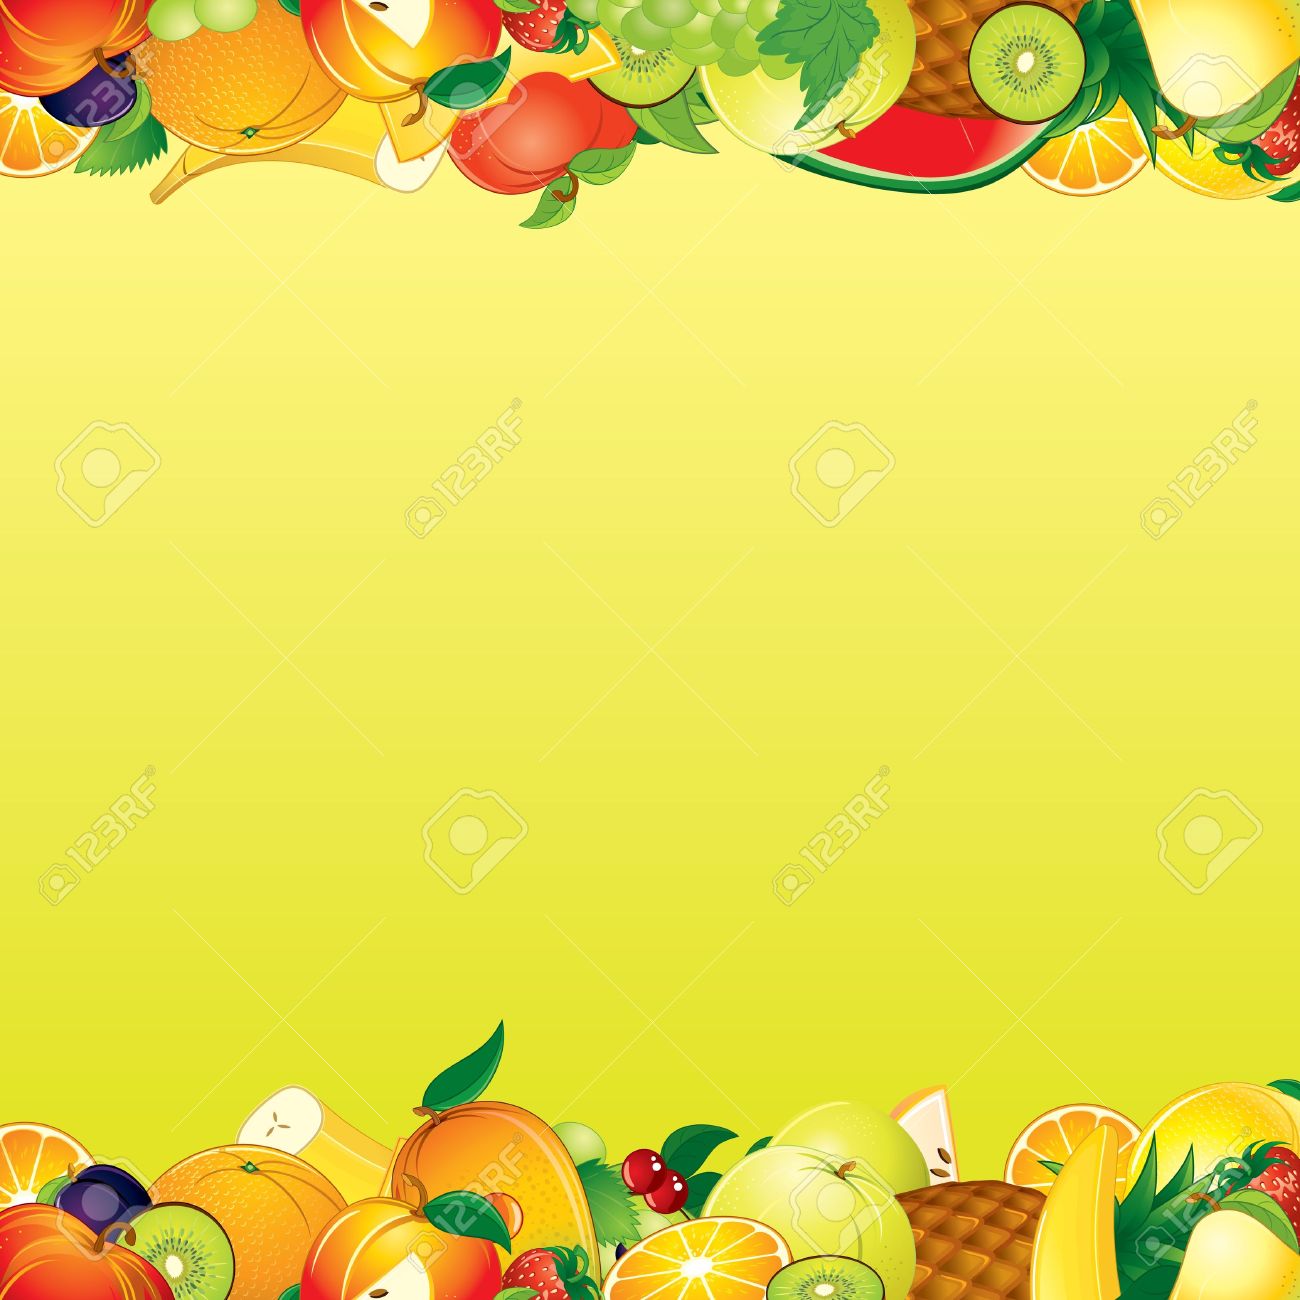 Free Fruit Background Cliparts, Download Free Clip Art, Free